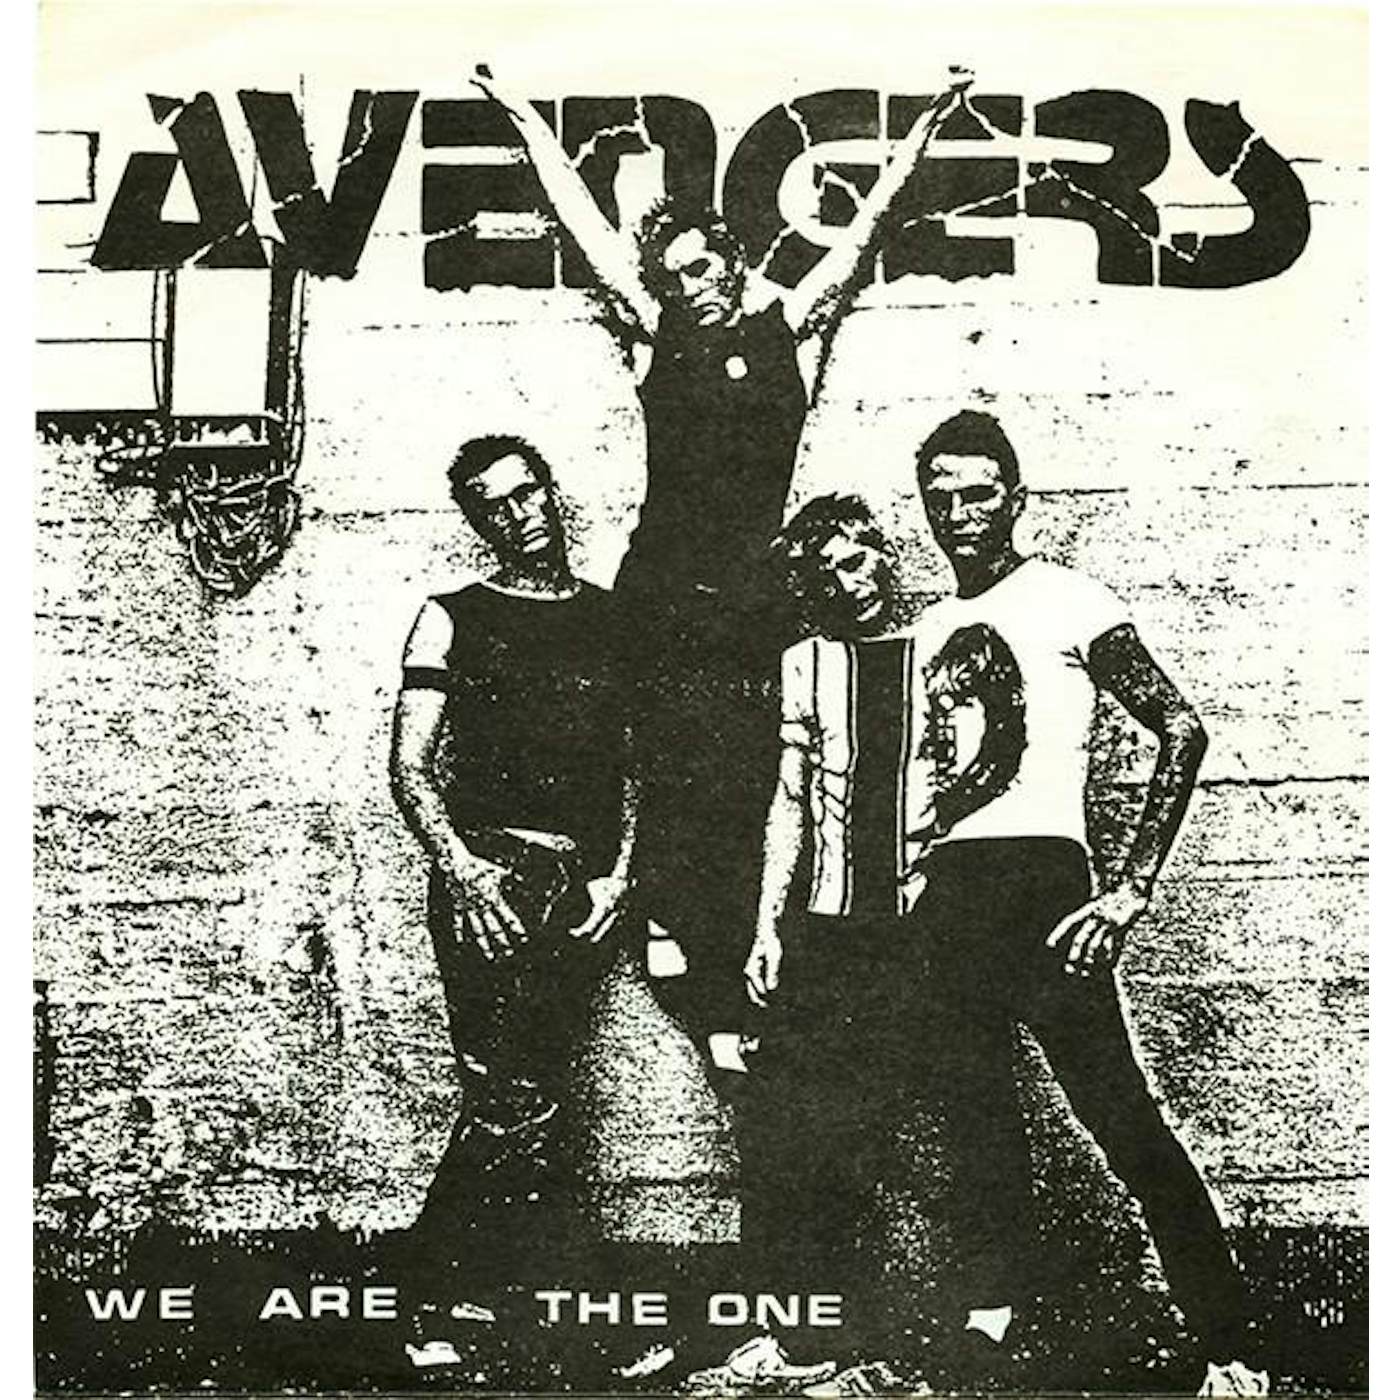 AVENGERS We Are The One Vinyl Record